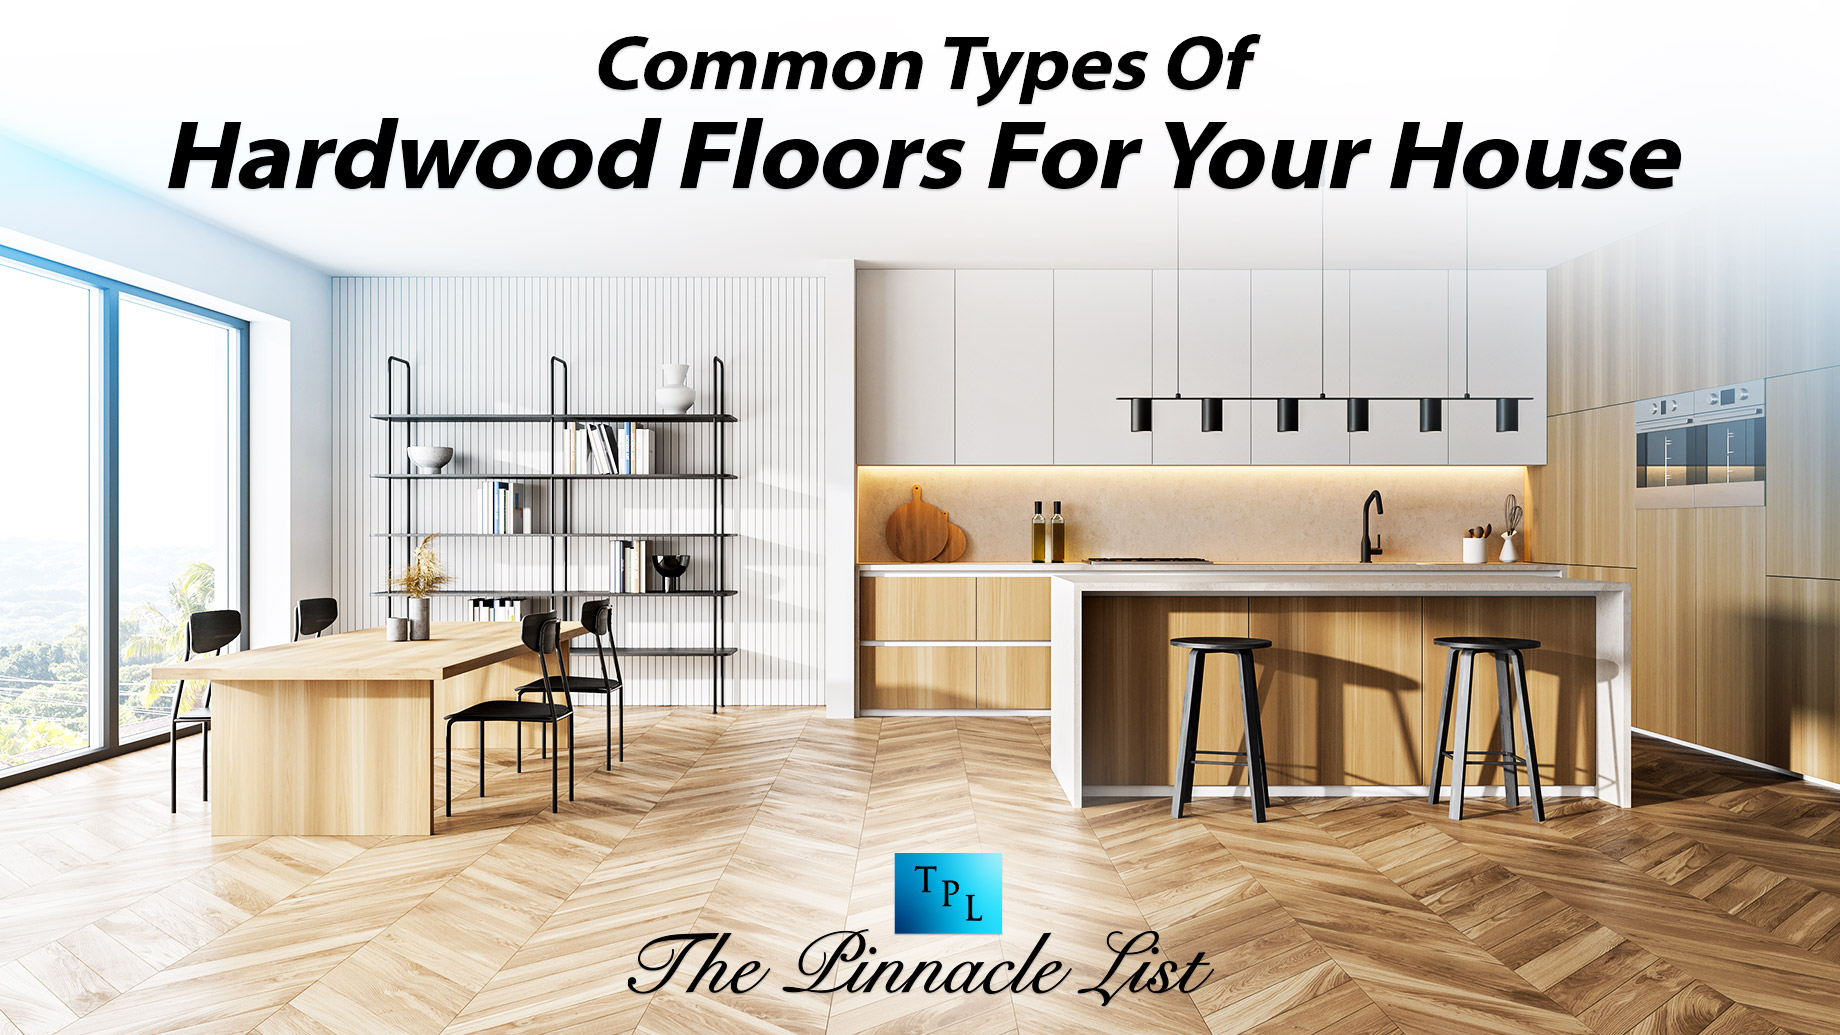 Common Types Of Hardwood Floors For Your House